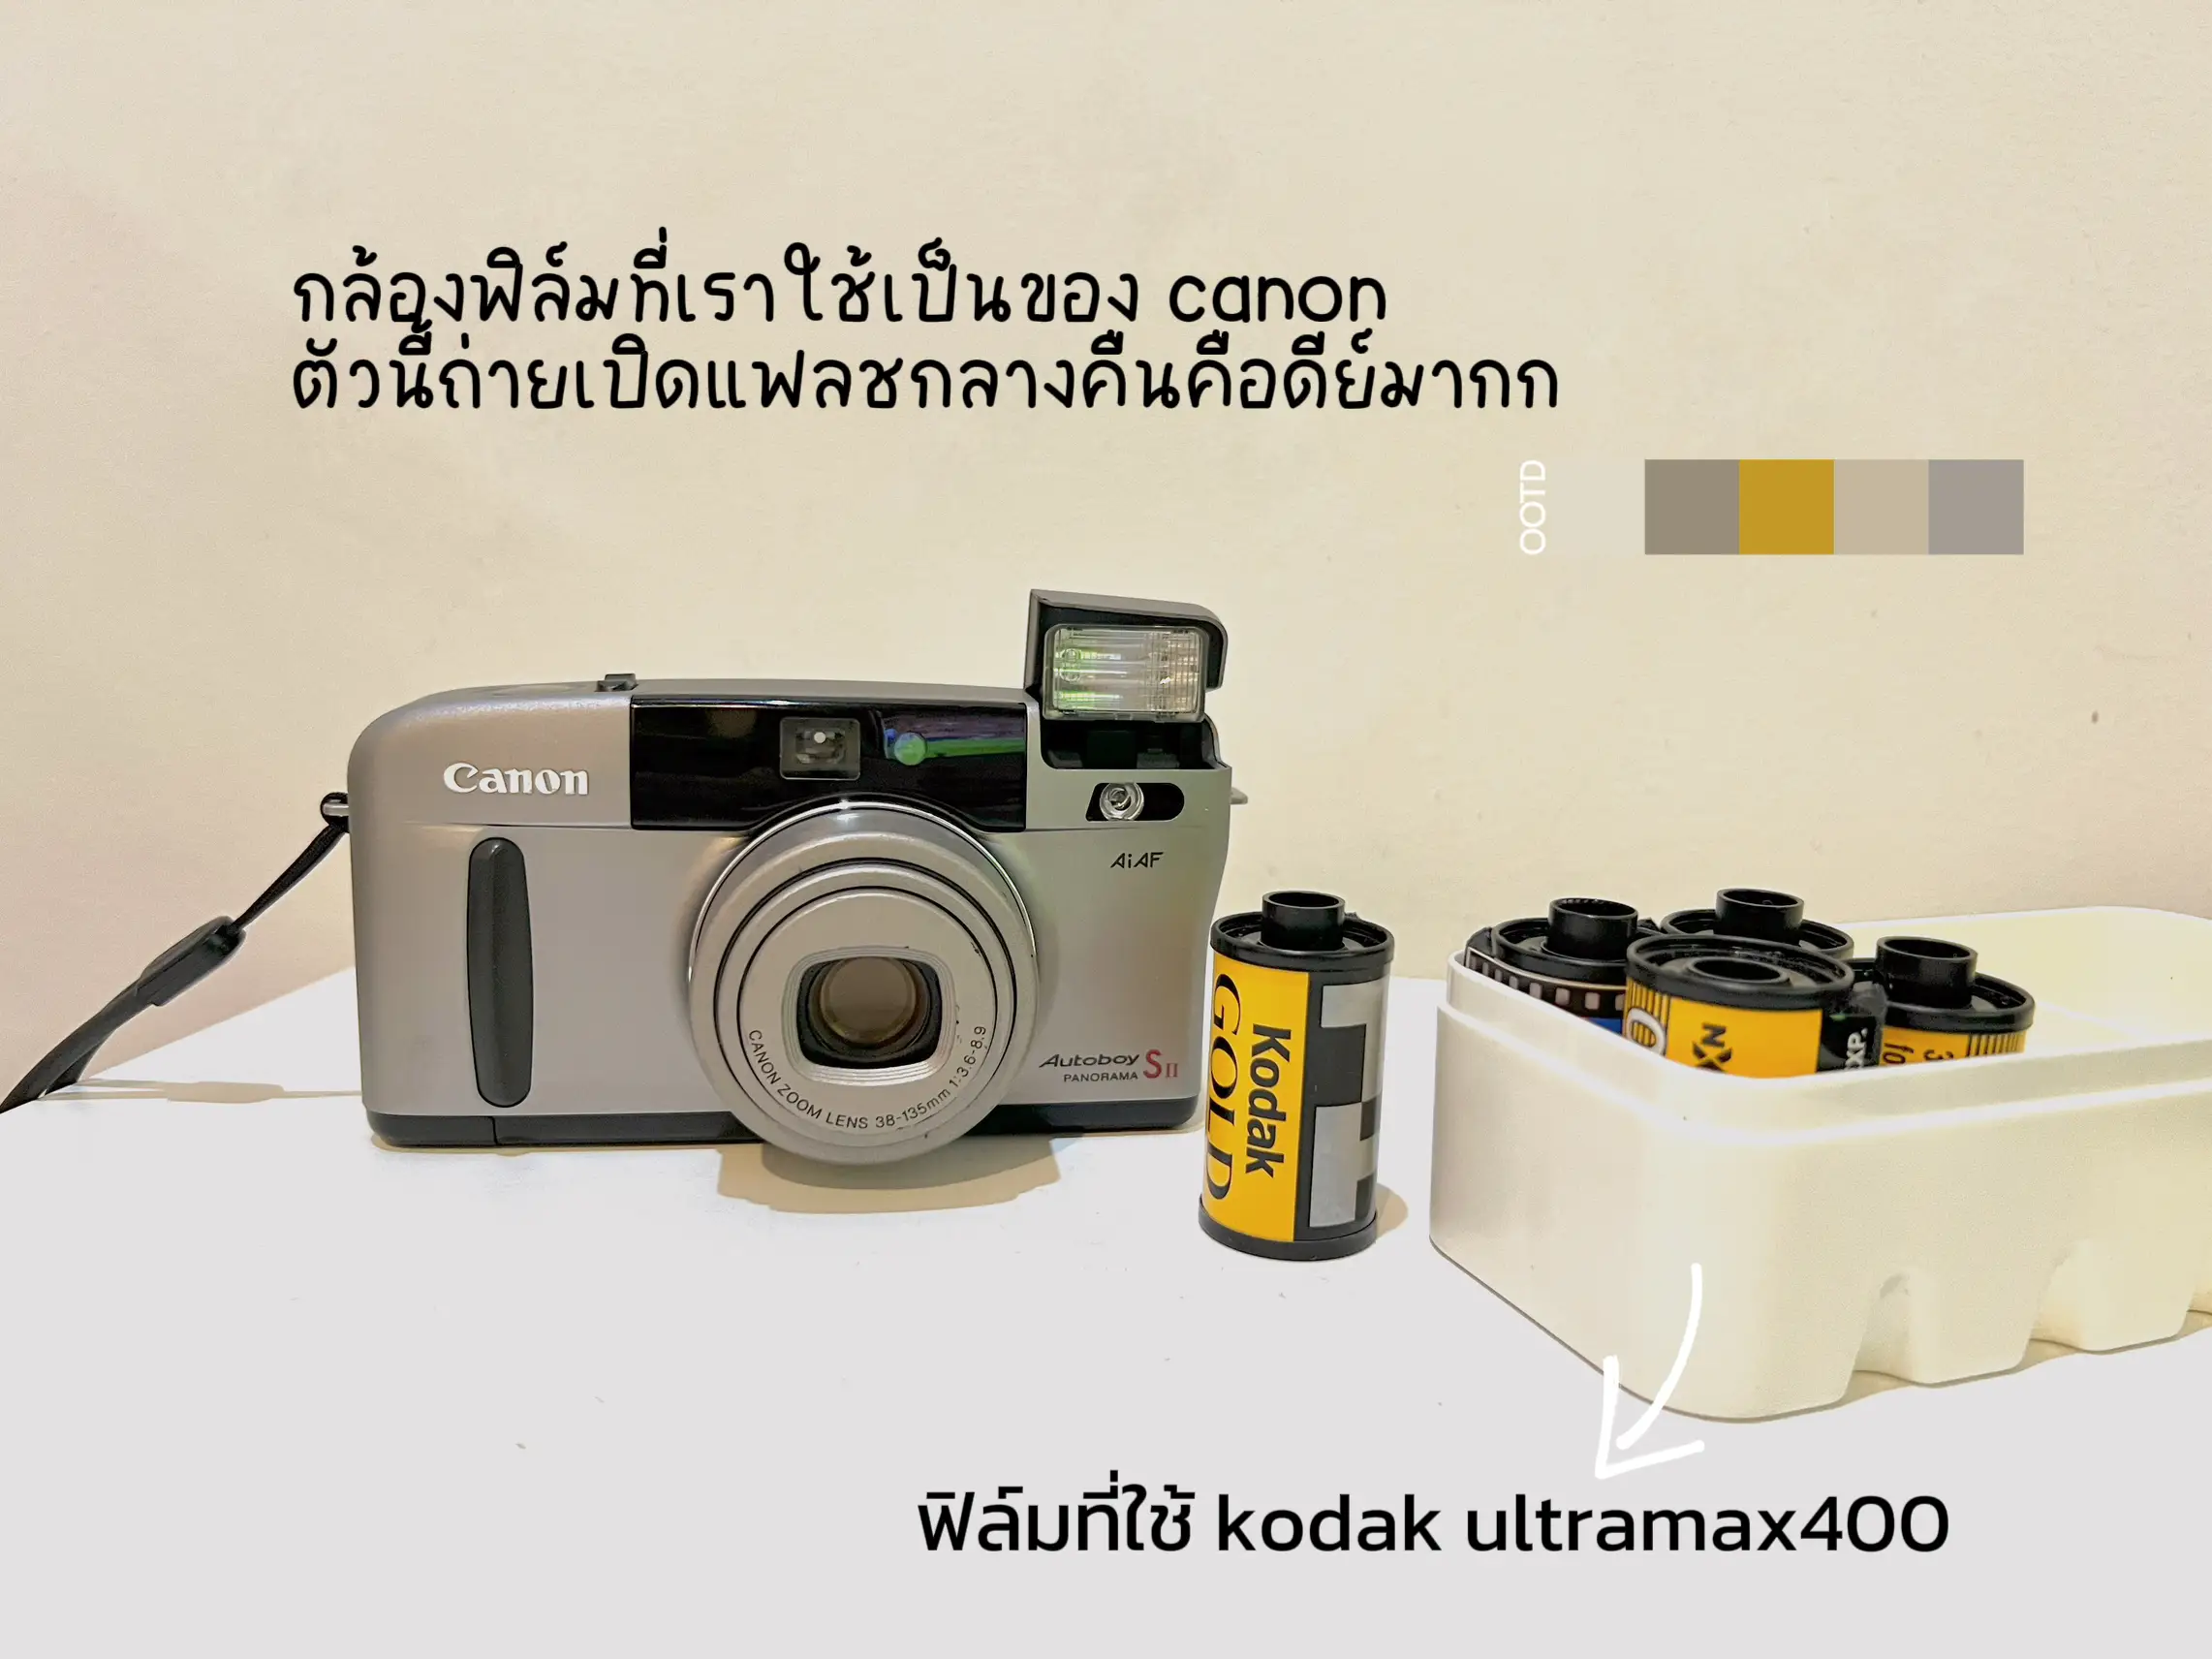 📌Canon autoboy sii film camera review shoot night flash together 